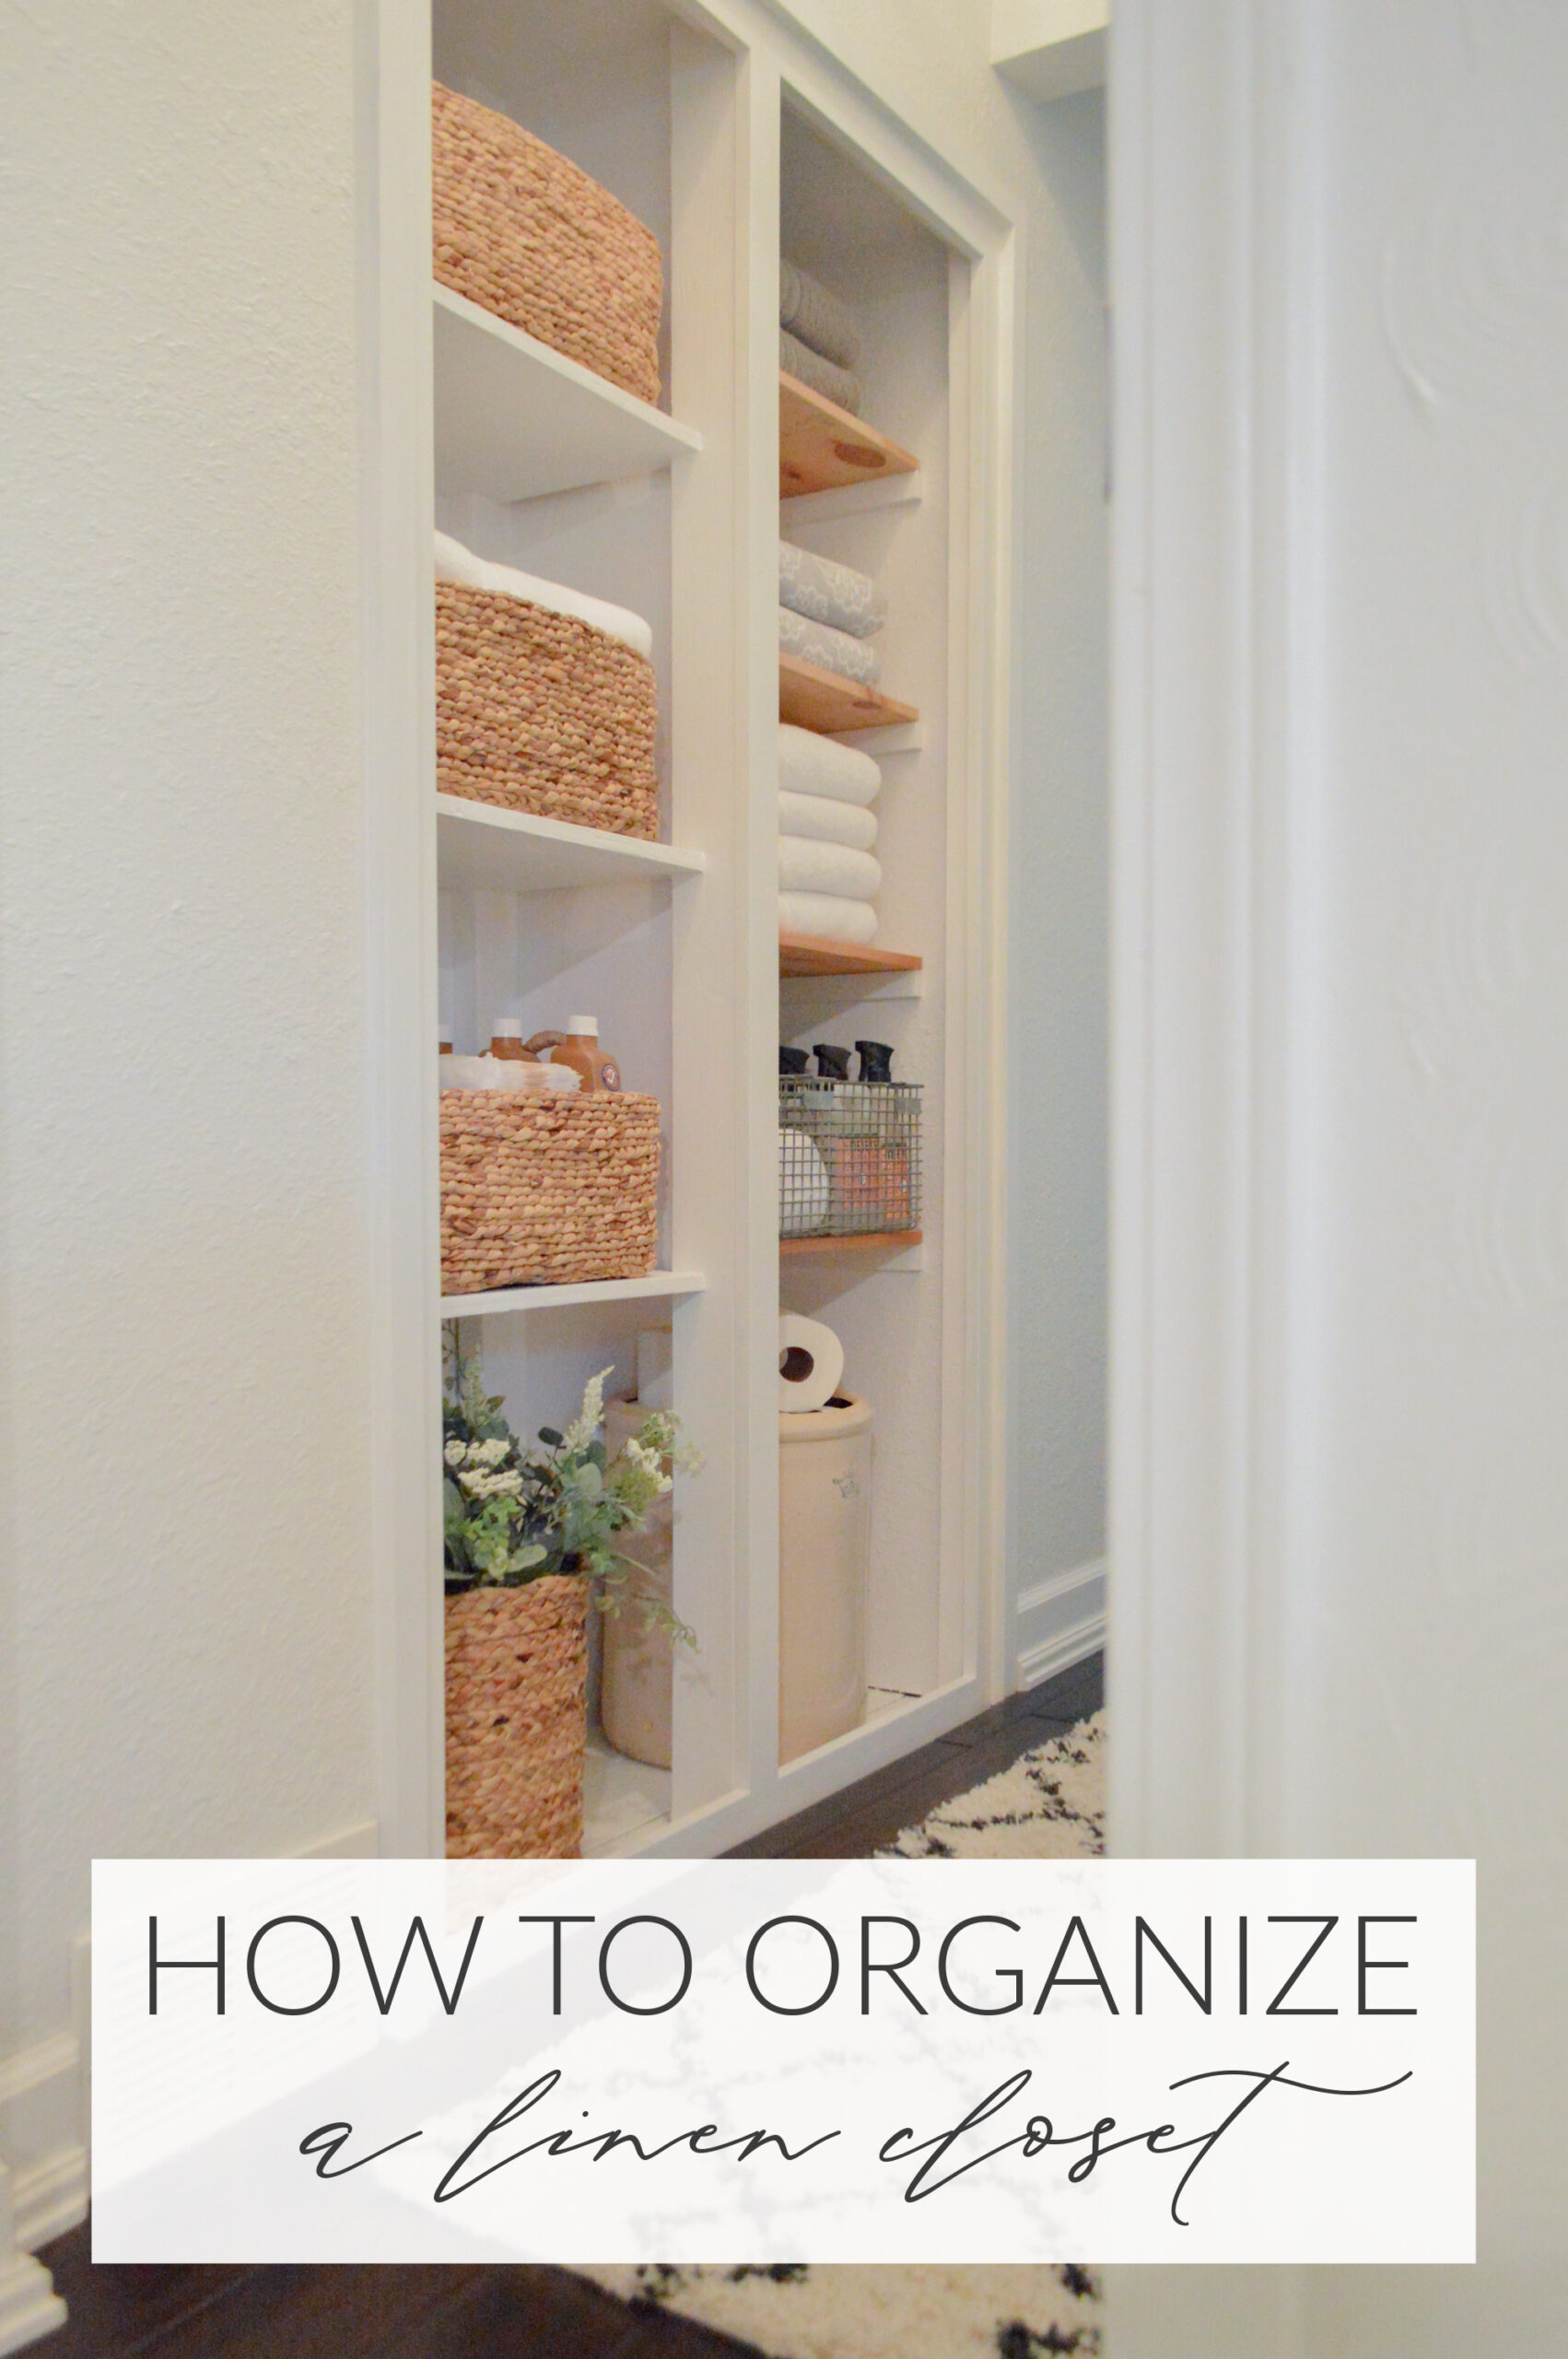 https://foxhollowcottage.com/wp-content/uploads/2021/01/how-to-organize-a-linen-cloest-simple-organizing-ideas-foxhollowcottage.com-easy-affordable-little-house-storage-scaled.jpg